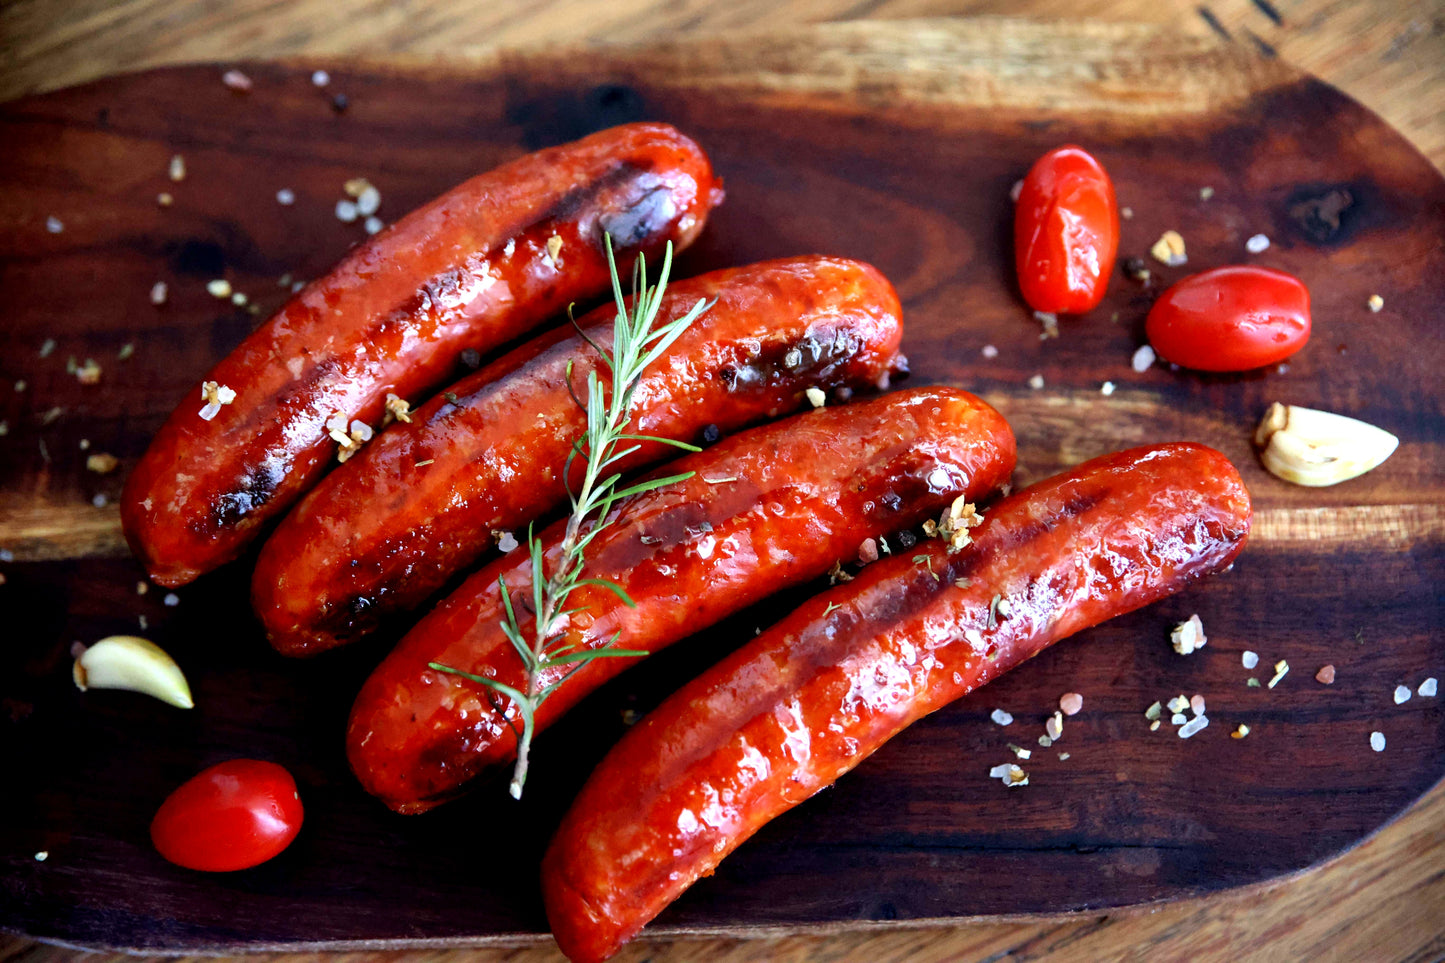 HOT Fresh Spanish Chorizo Random weight approx. 1kg packet 8 pieces regular price $16.00 AUD. You are guaranteed to receive at least 950g of product, equivalent price of $16.84 per kg.